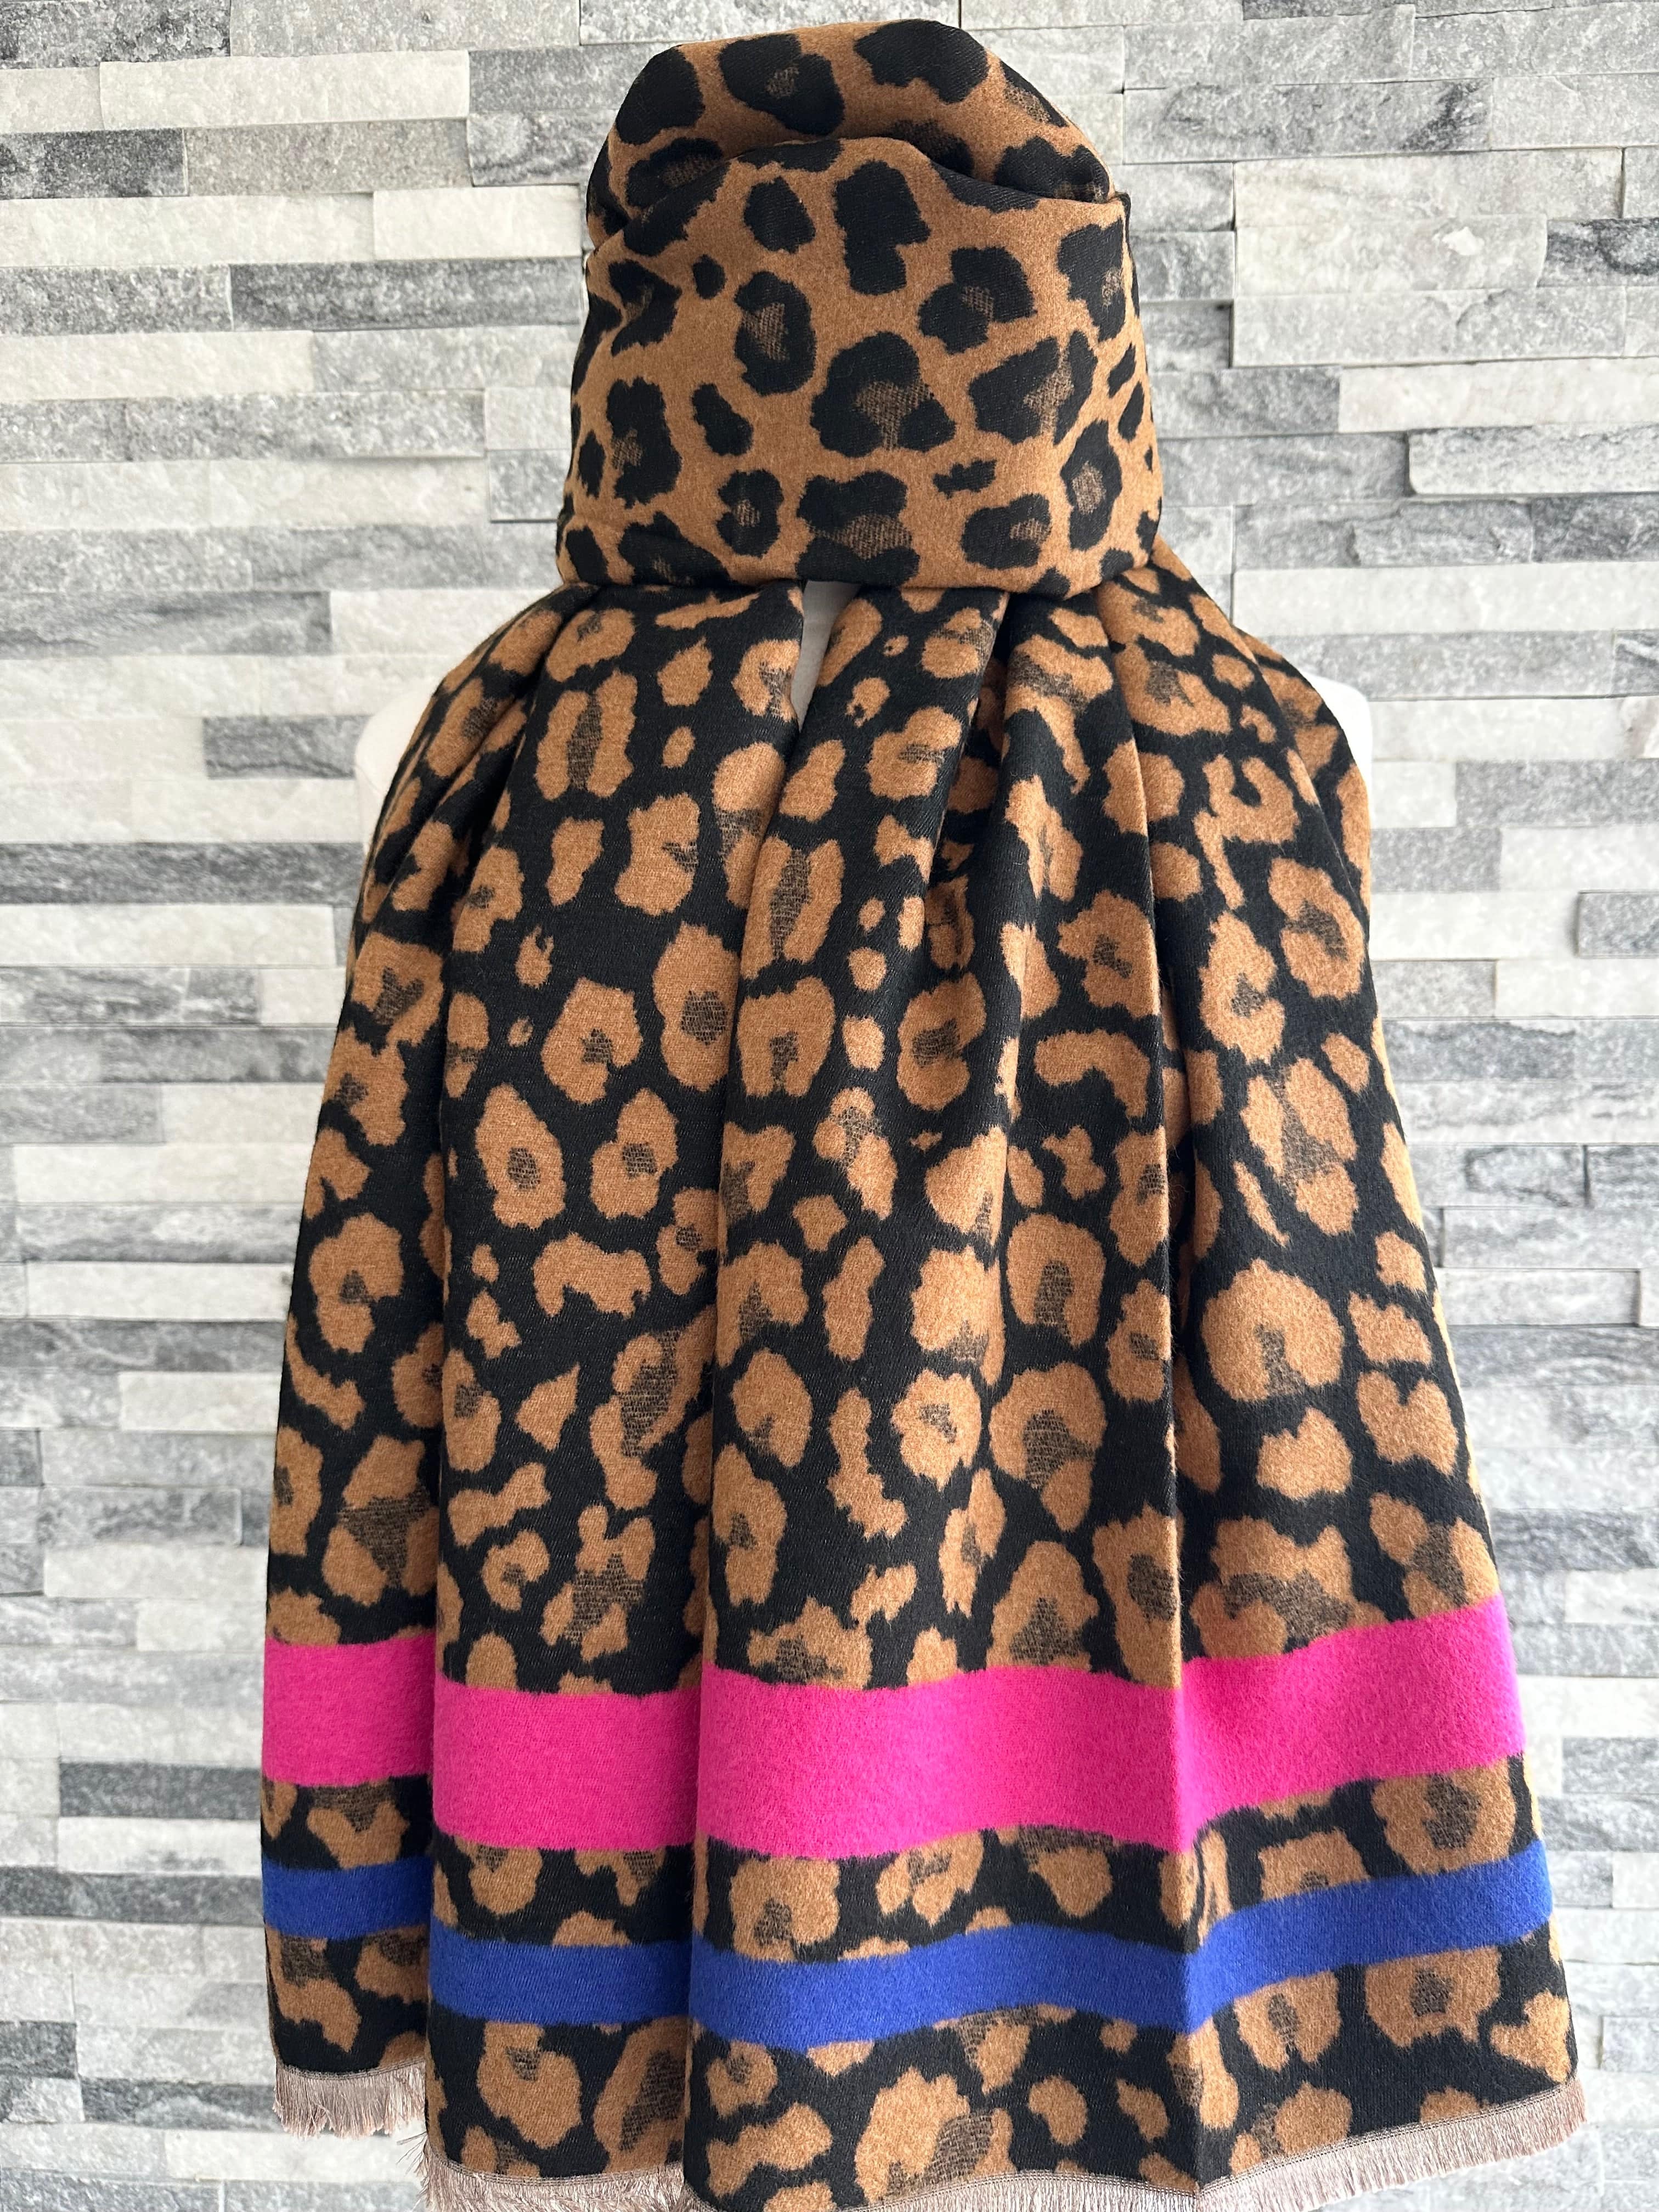 lusciousscarves Black and Brown Animal Print Design Scarf / Wrap , cashmere blend.